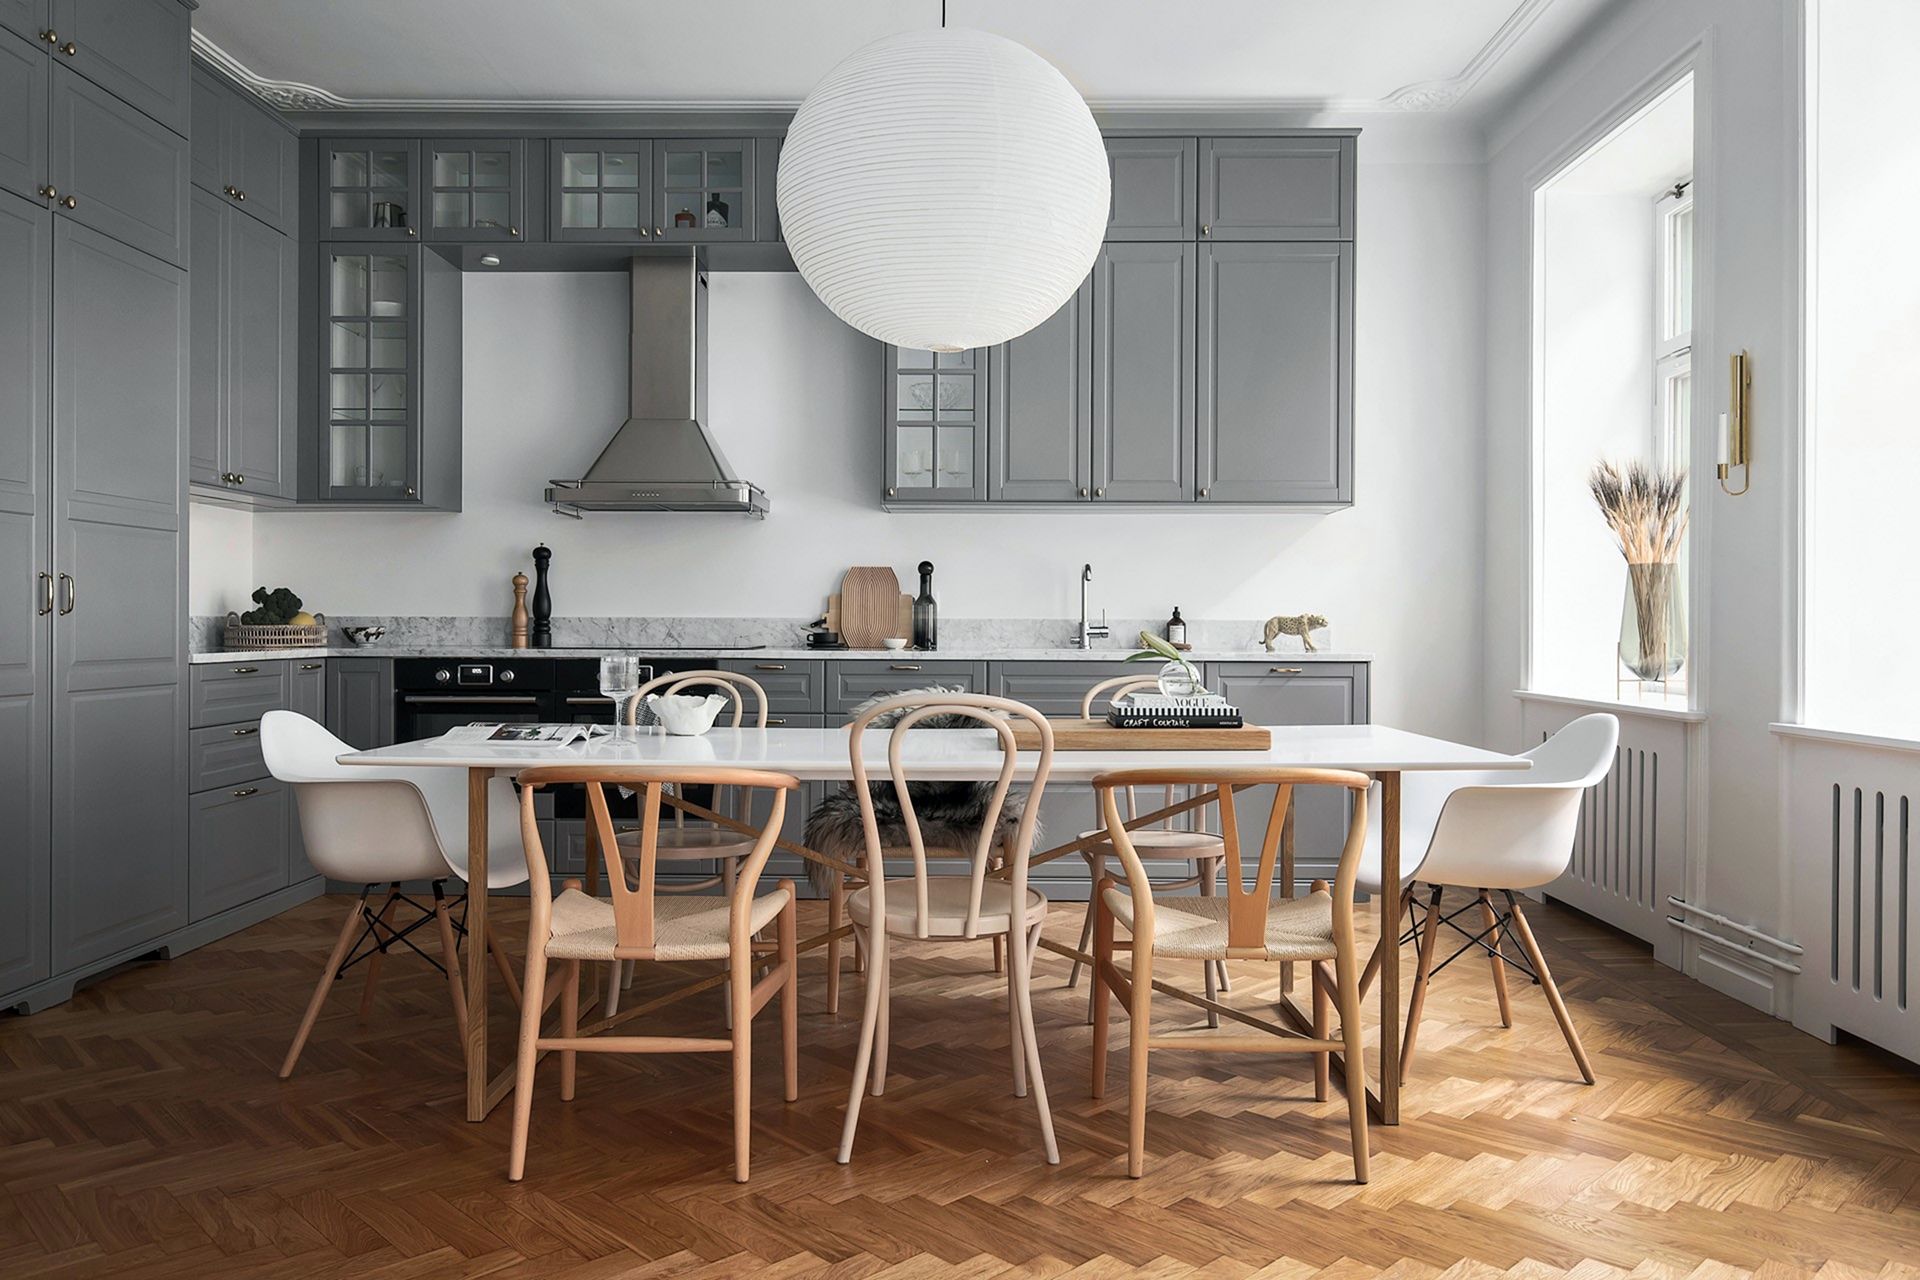 Scandinavian Kitchen From Pufikhomes